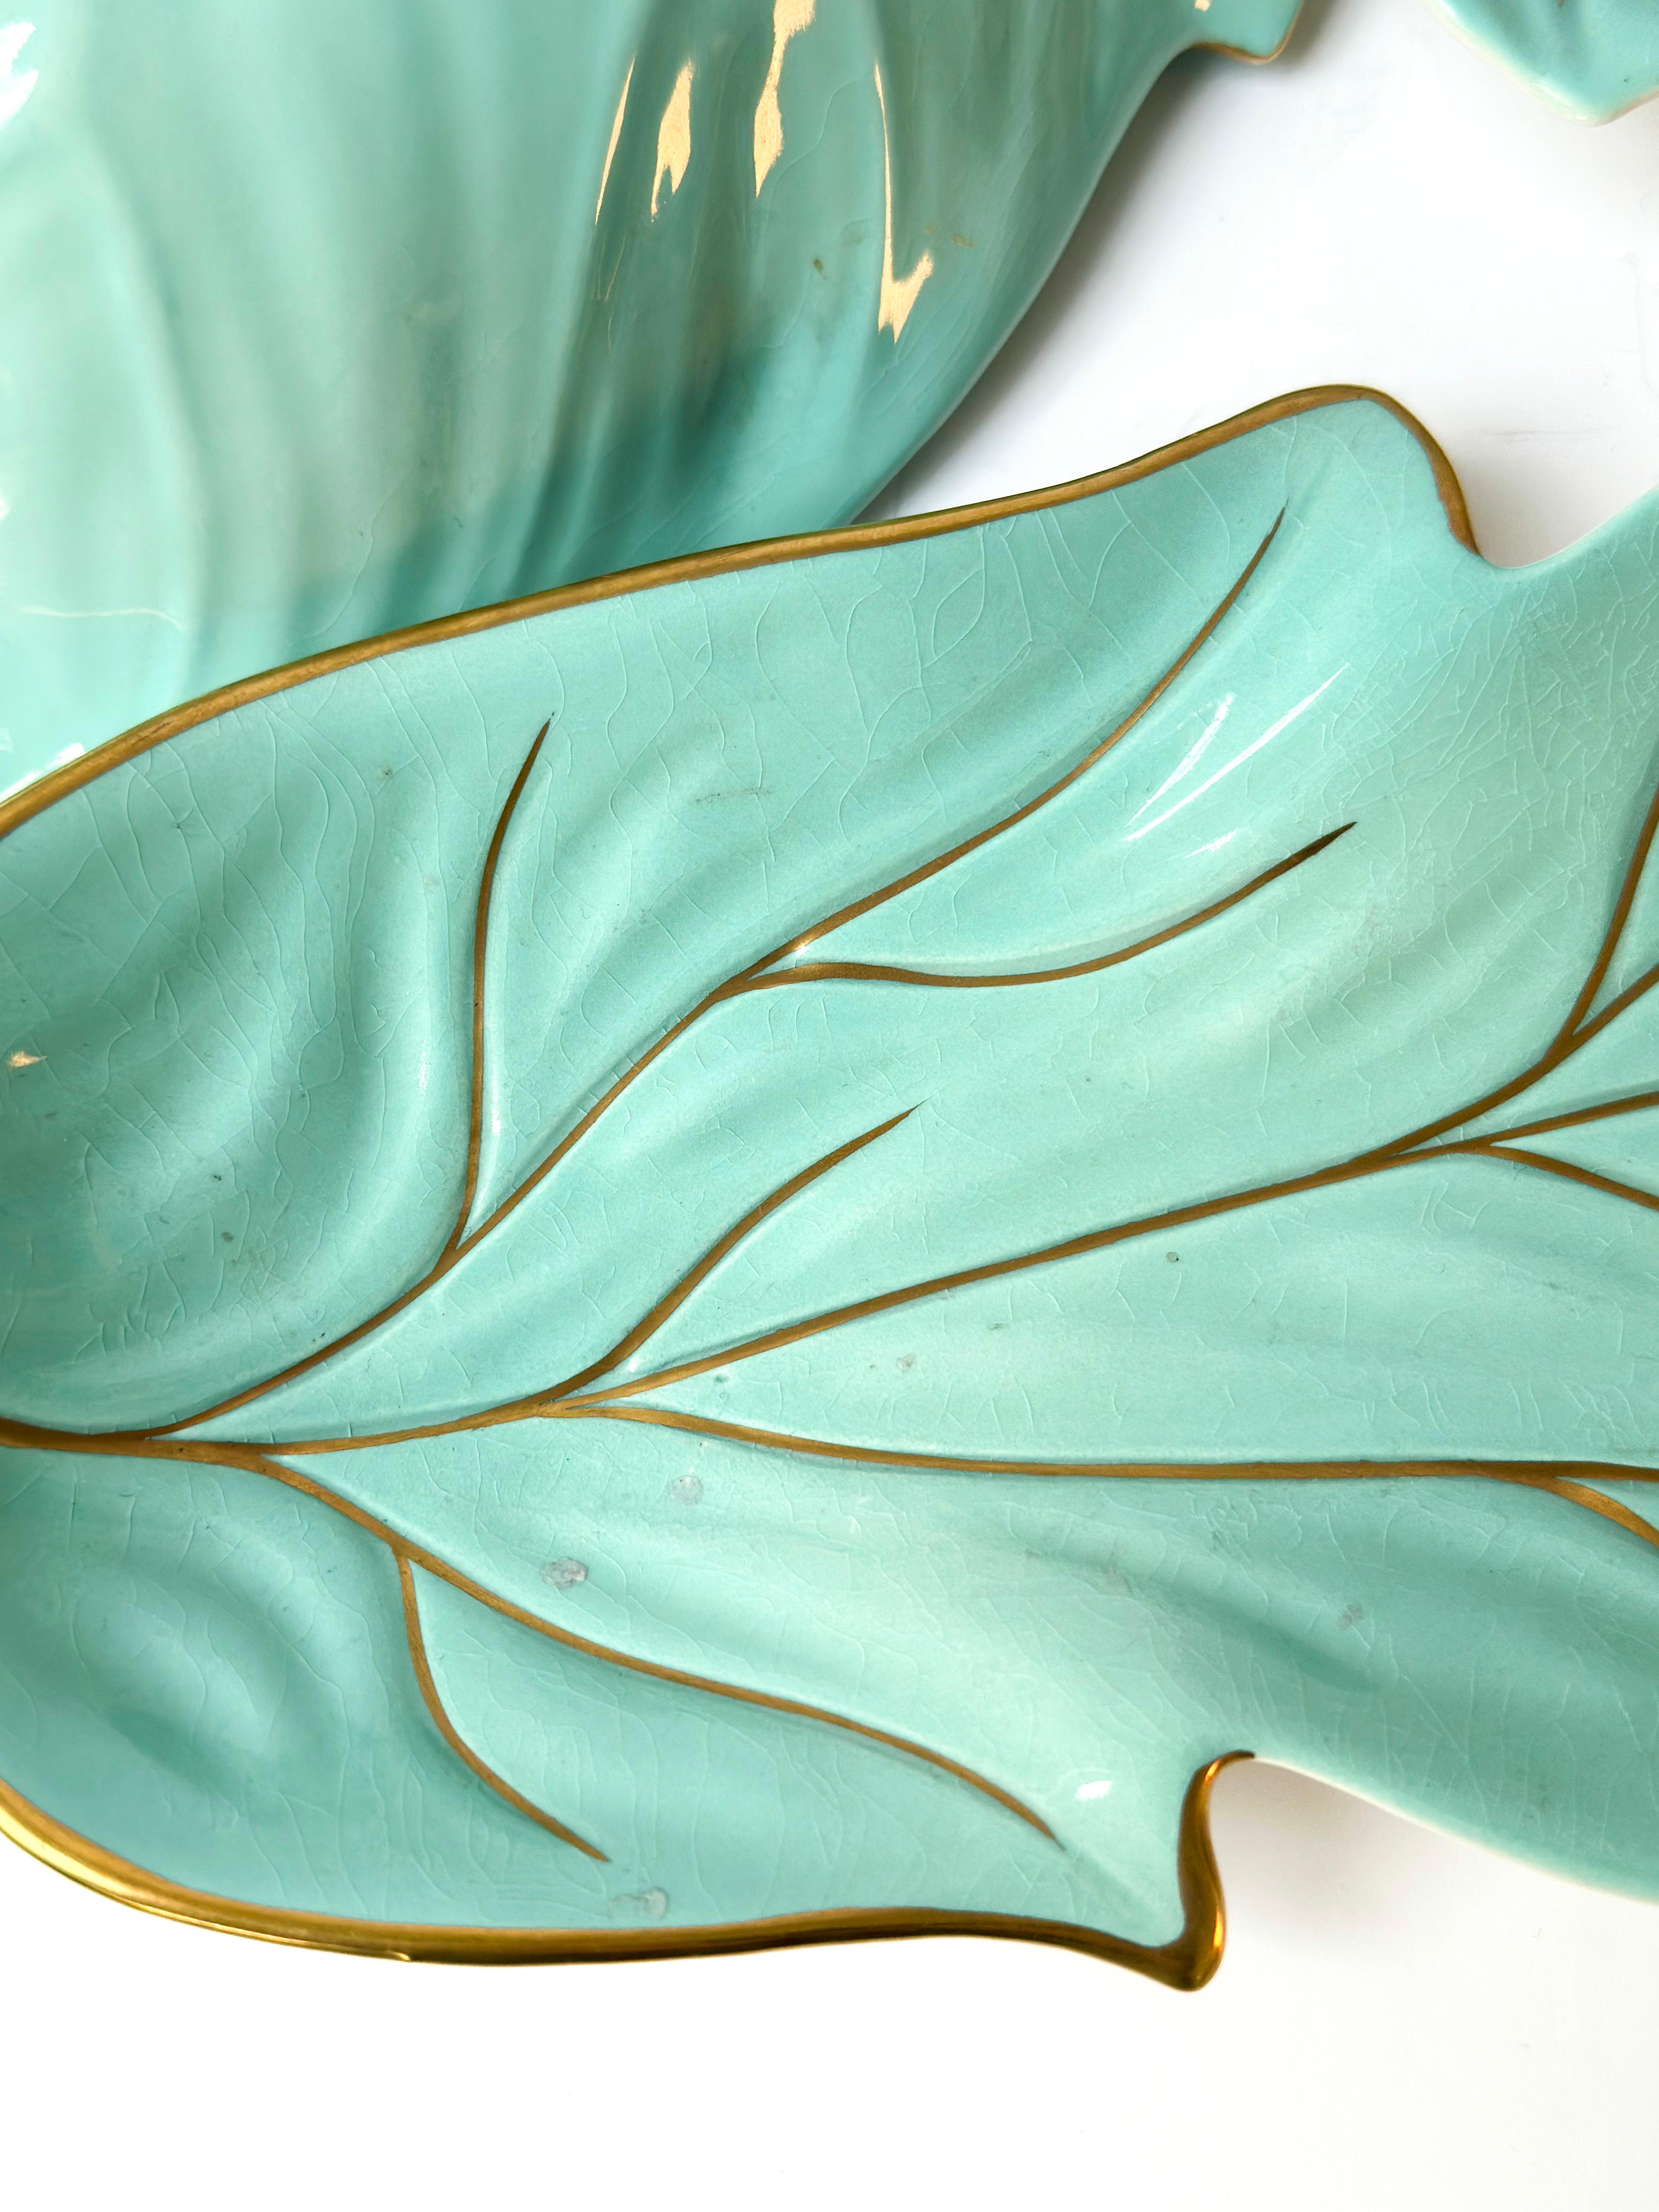 Glazed Vintage Hollywood Regency Style Turquoise and Gold Leaf Plates by Carlton Ware  For Sale